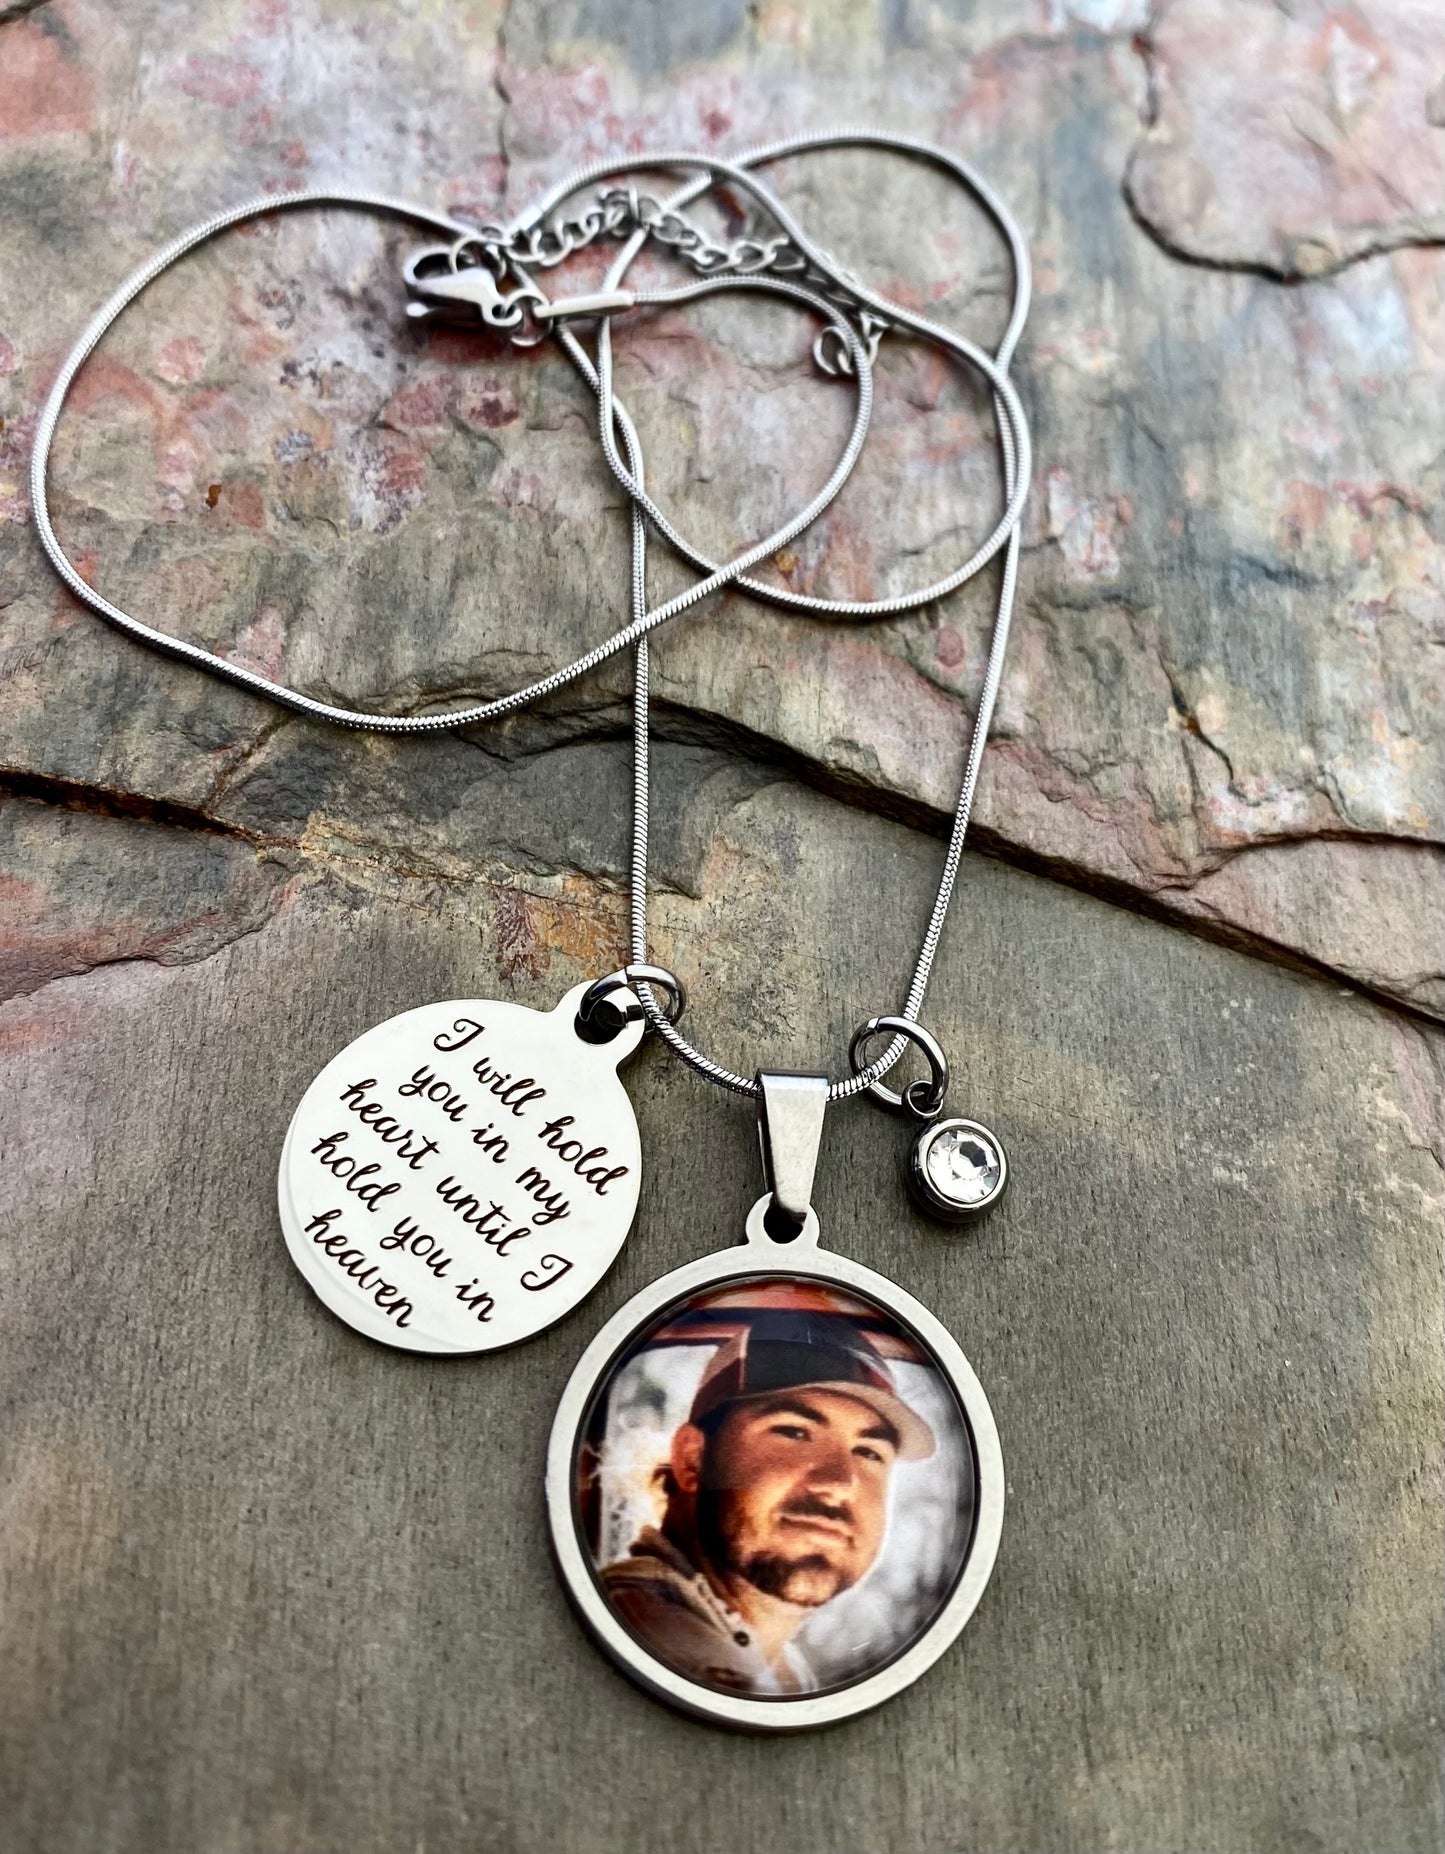 Memory Photo Necklace- I will hold you in my heart until I hold you in heaven